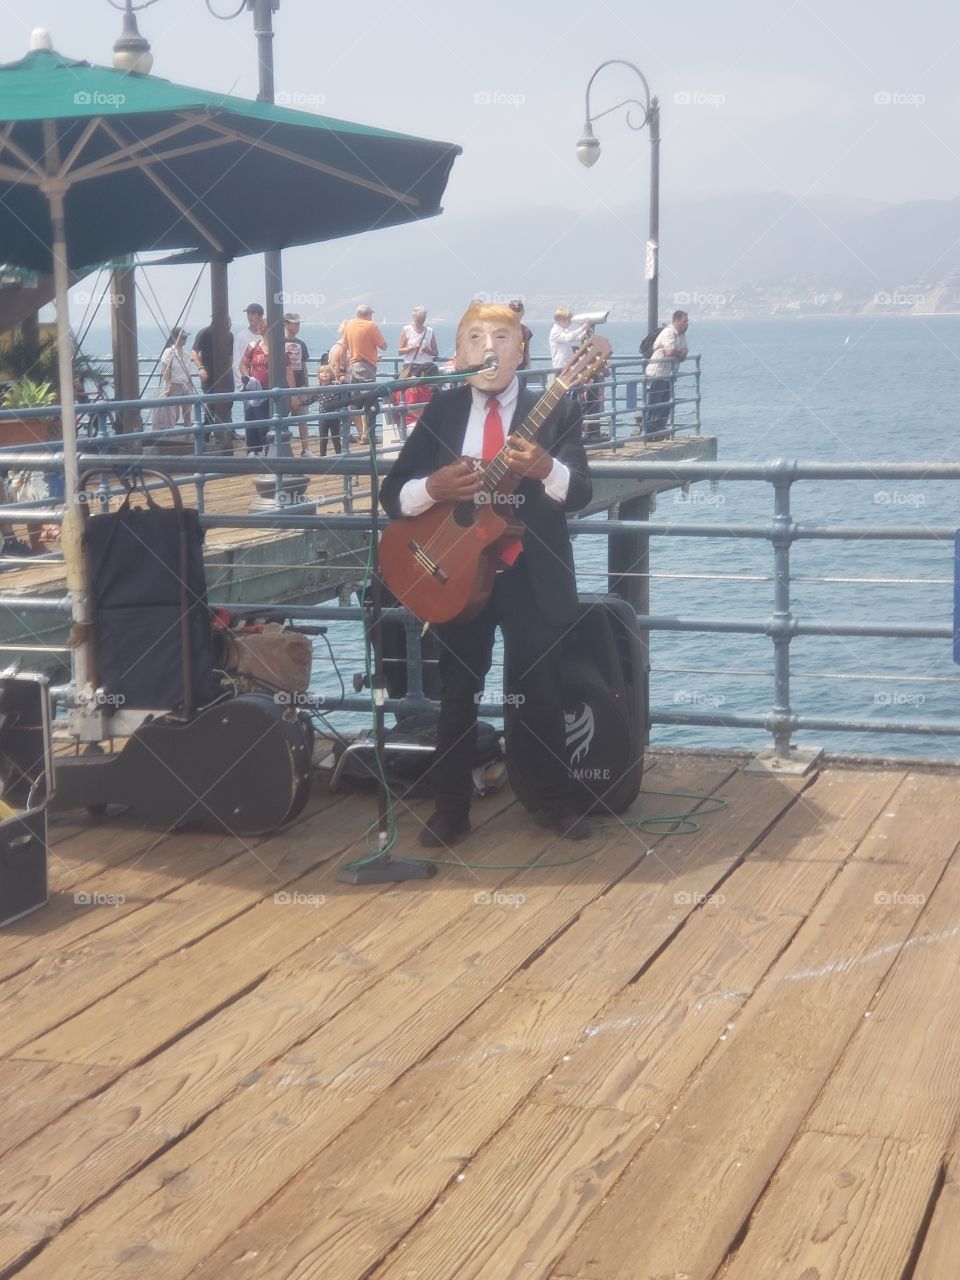 This isn't political. Just some guy having fun at the Santa Monoca Pier in Los Angeles, California.